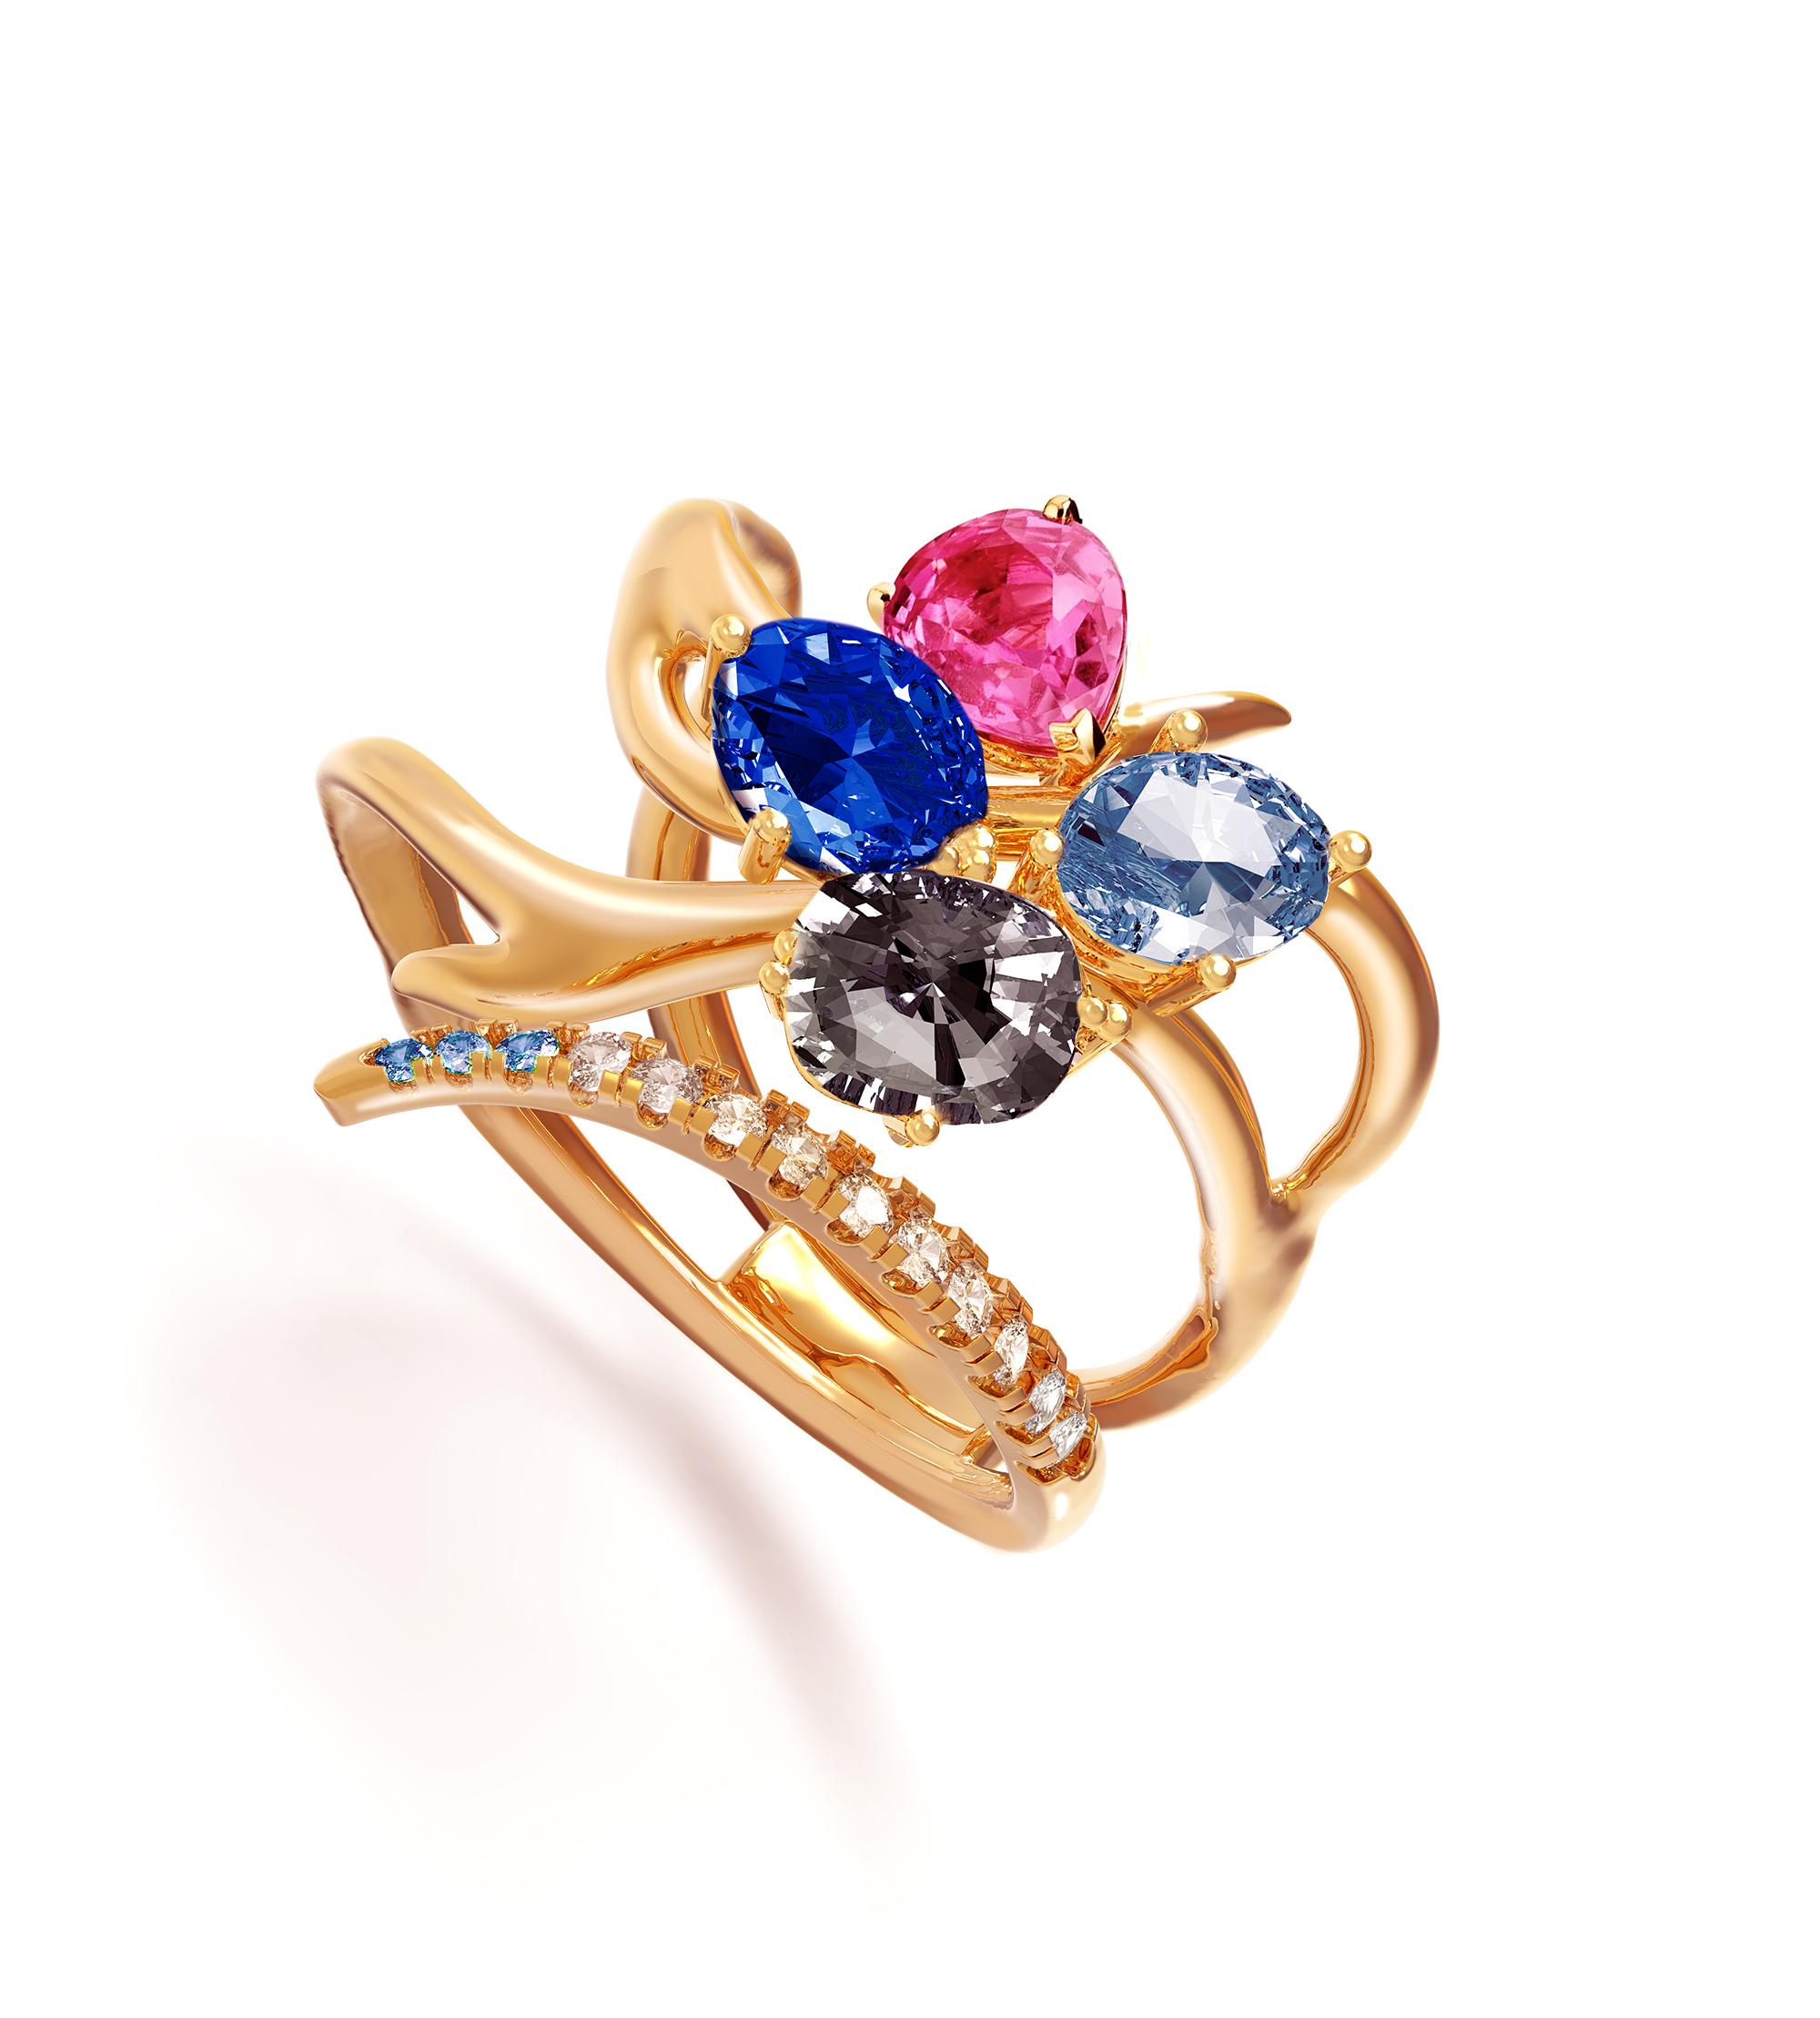 This Harajuku contemporary artistic sculptural ring is made of 18 karat yellow gold with natural gems on your choice custom made.
The gems are:
Oval cut 2,65 carats natural unheated untreated vivid blue (royal blue) sapphire, GRS (Swiss Lab)